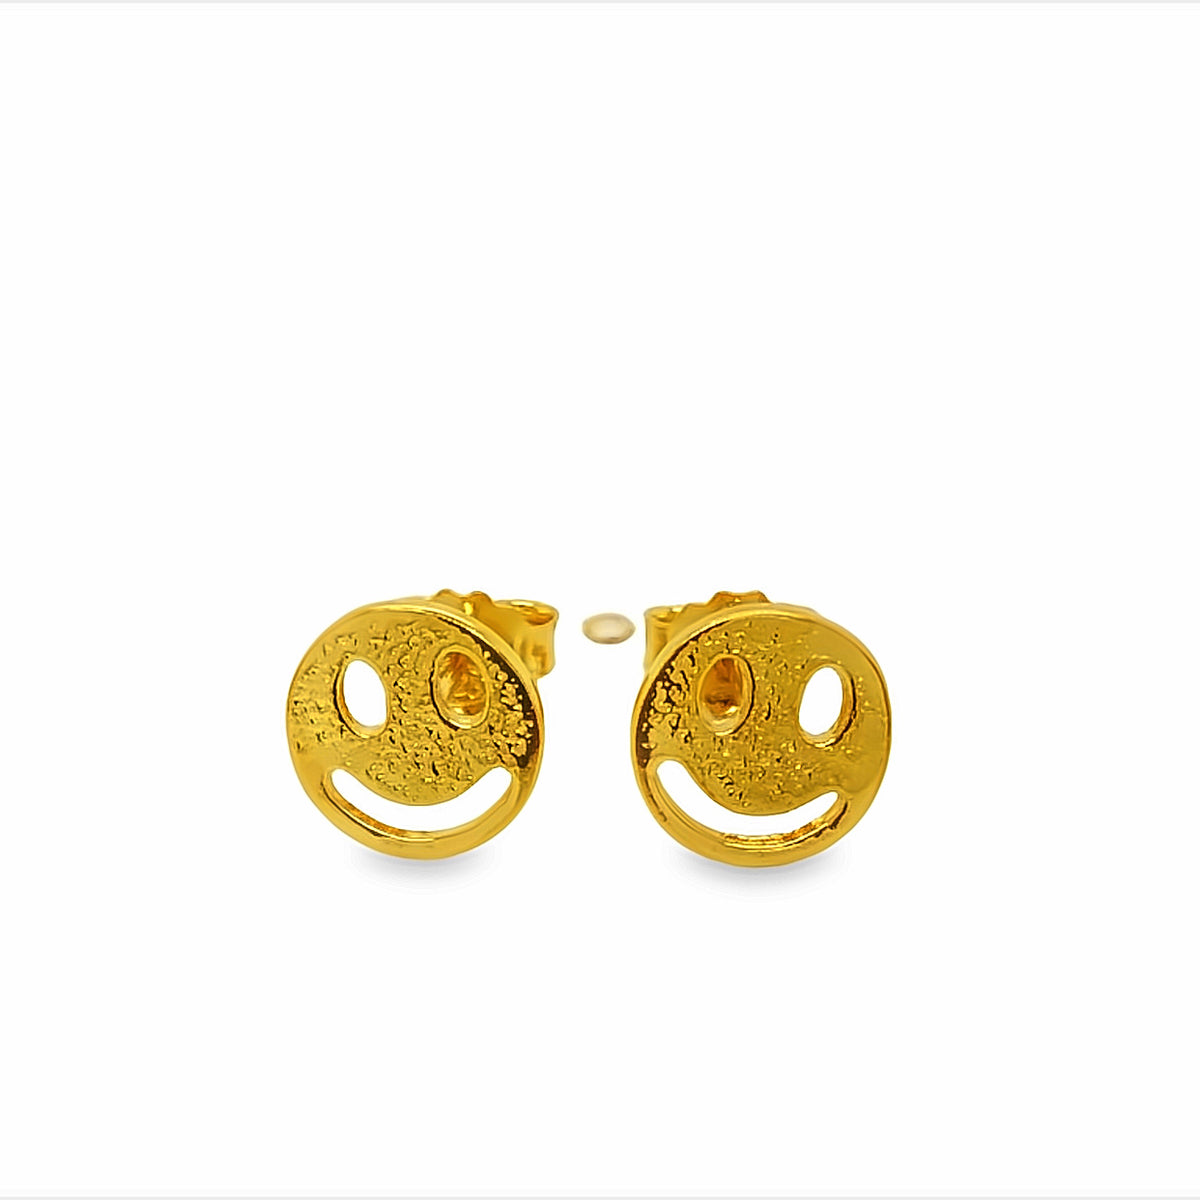 Silver Gold Plated Smiley Face With Textured Finish Stud Earrings